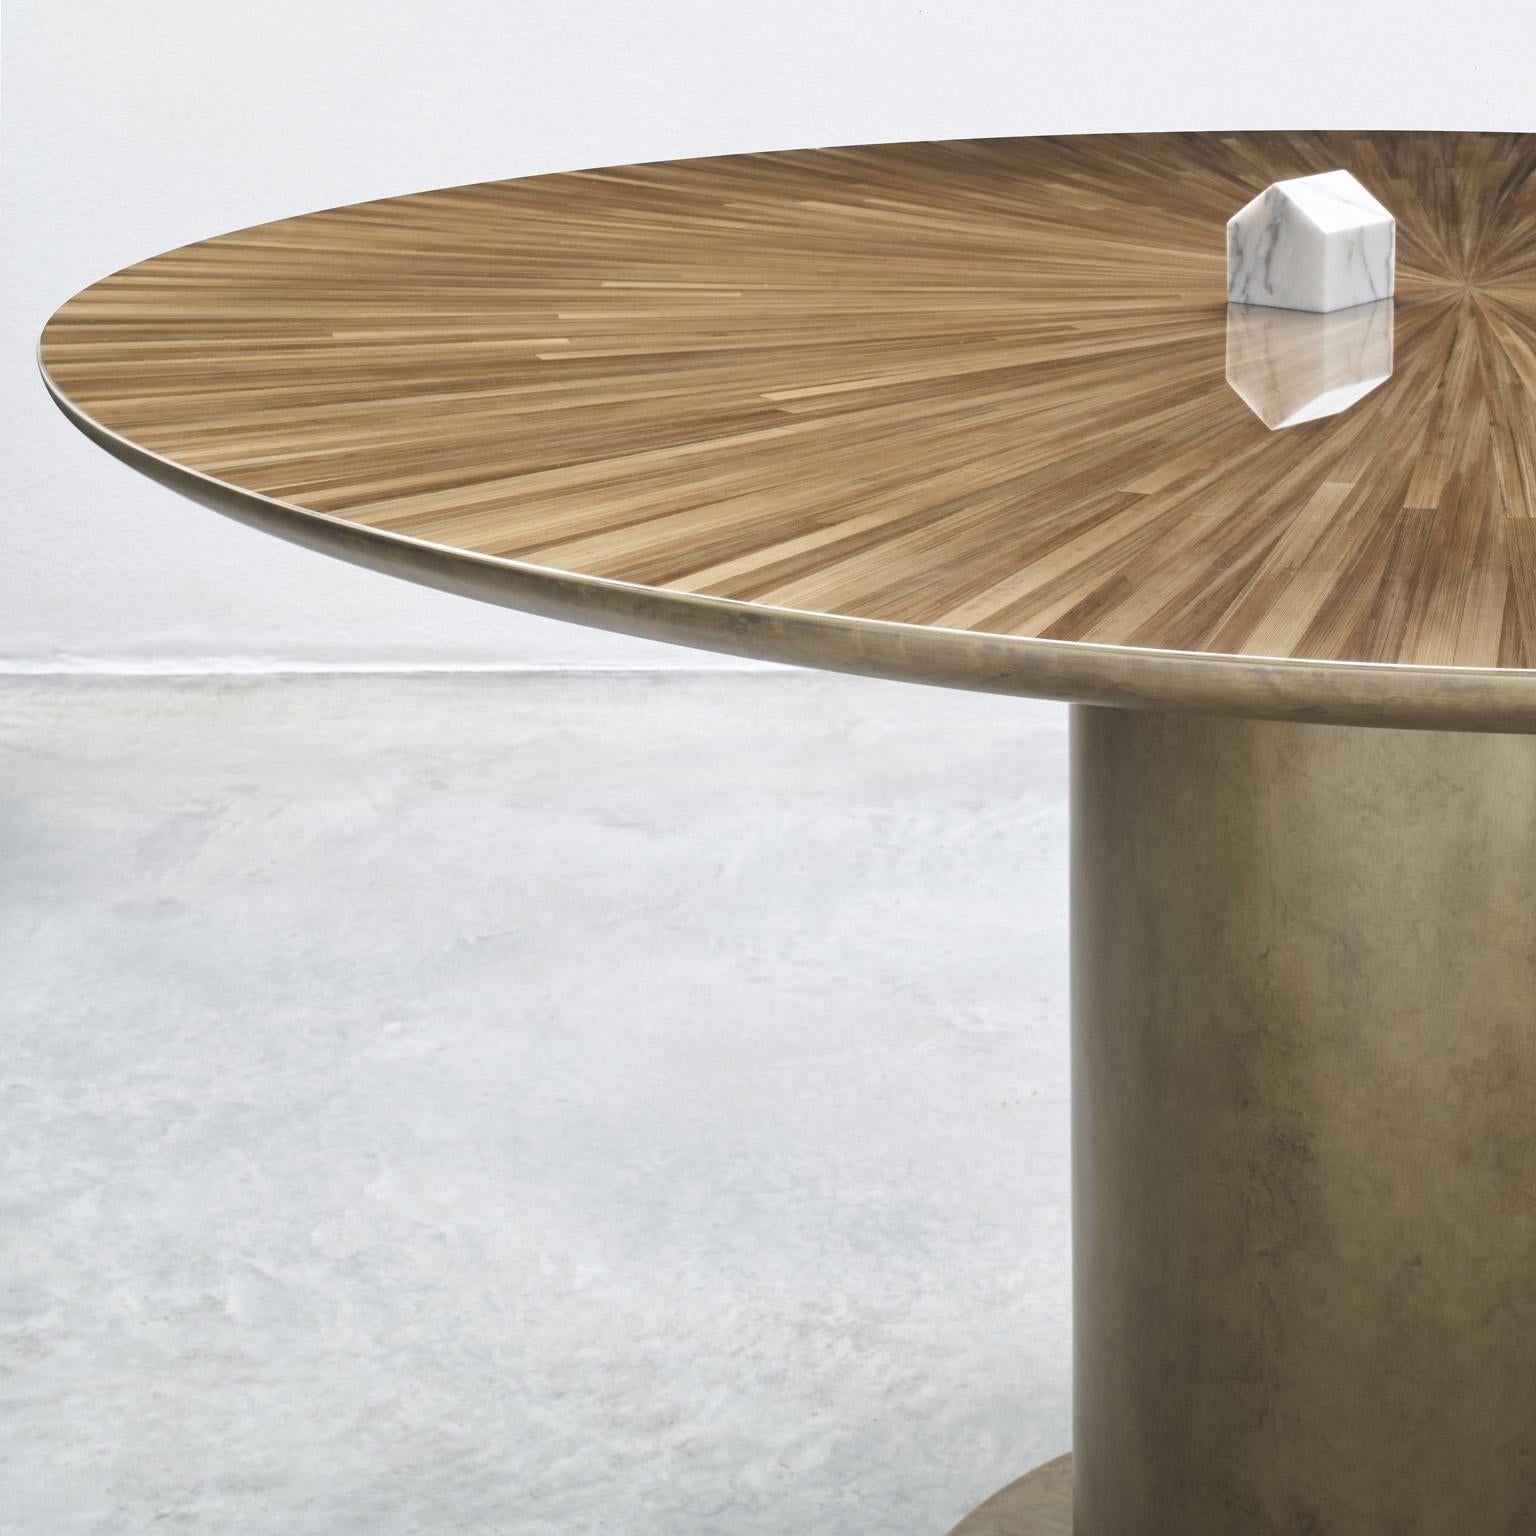 Simple and geometric, the shimmering straw surface of the tabletop contrasts its curves. The base is a column finished in liquid metal with oxidized brass effects.

Available in other colors: Blue and anthracite

Designed by Antonio De Marco and